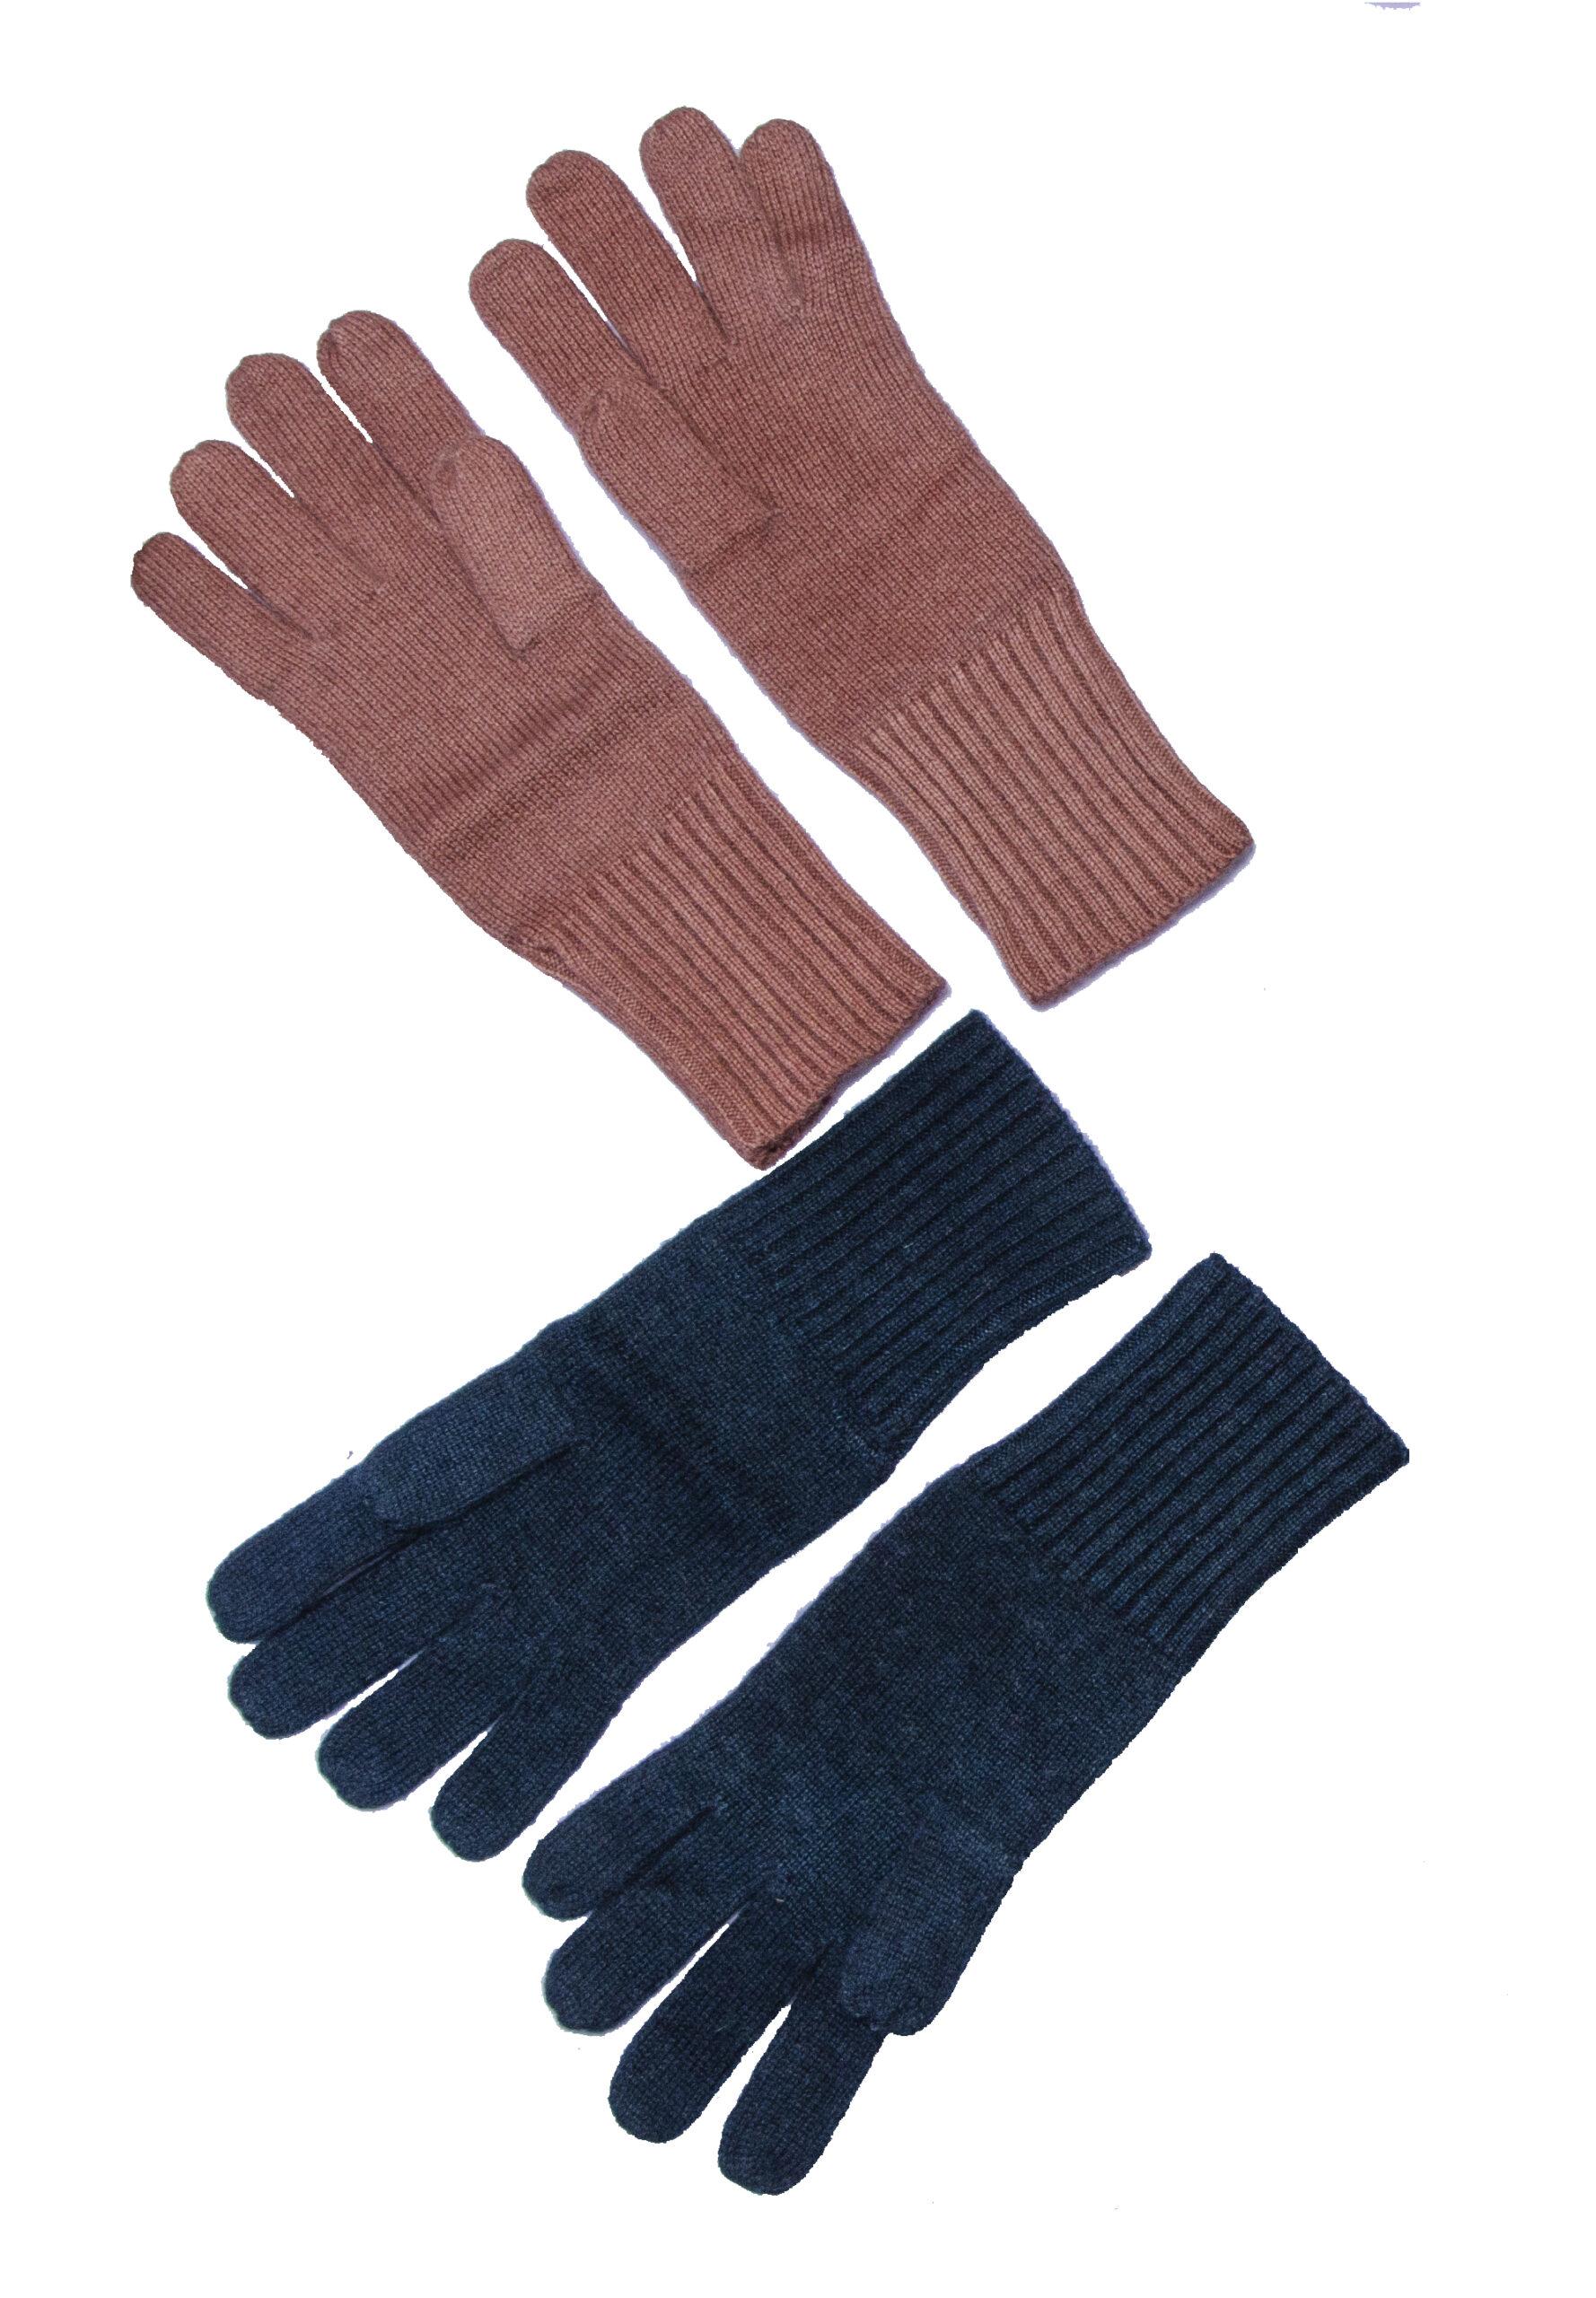 Woolen knitted gloves - Essence of Himal